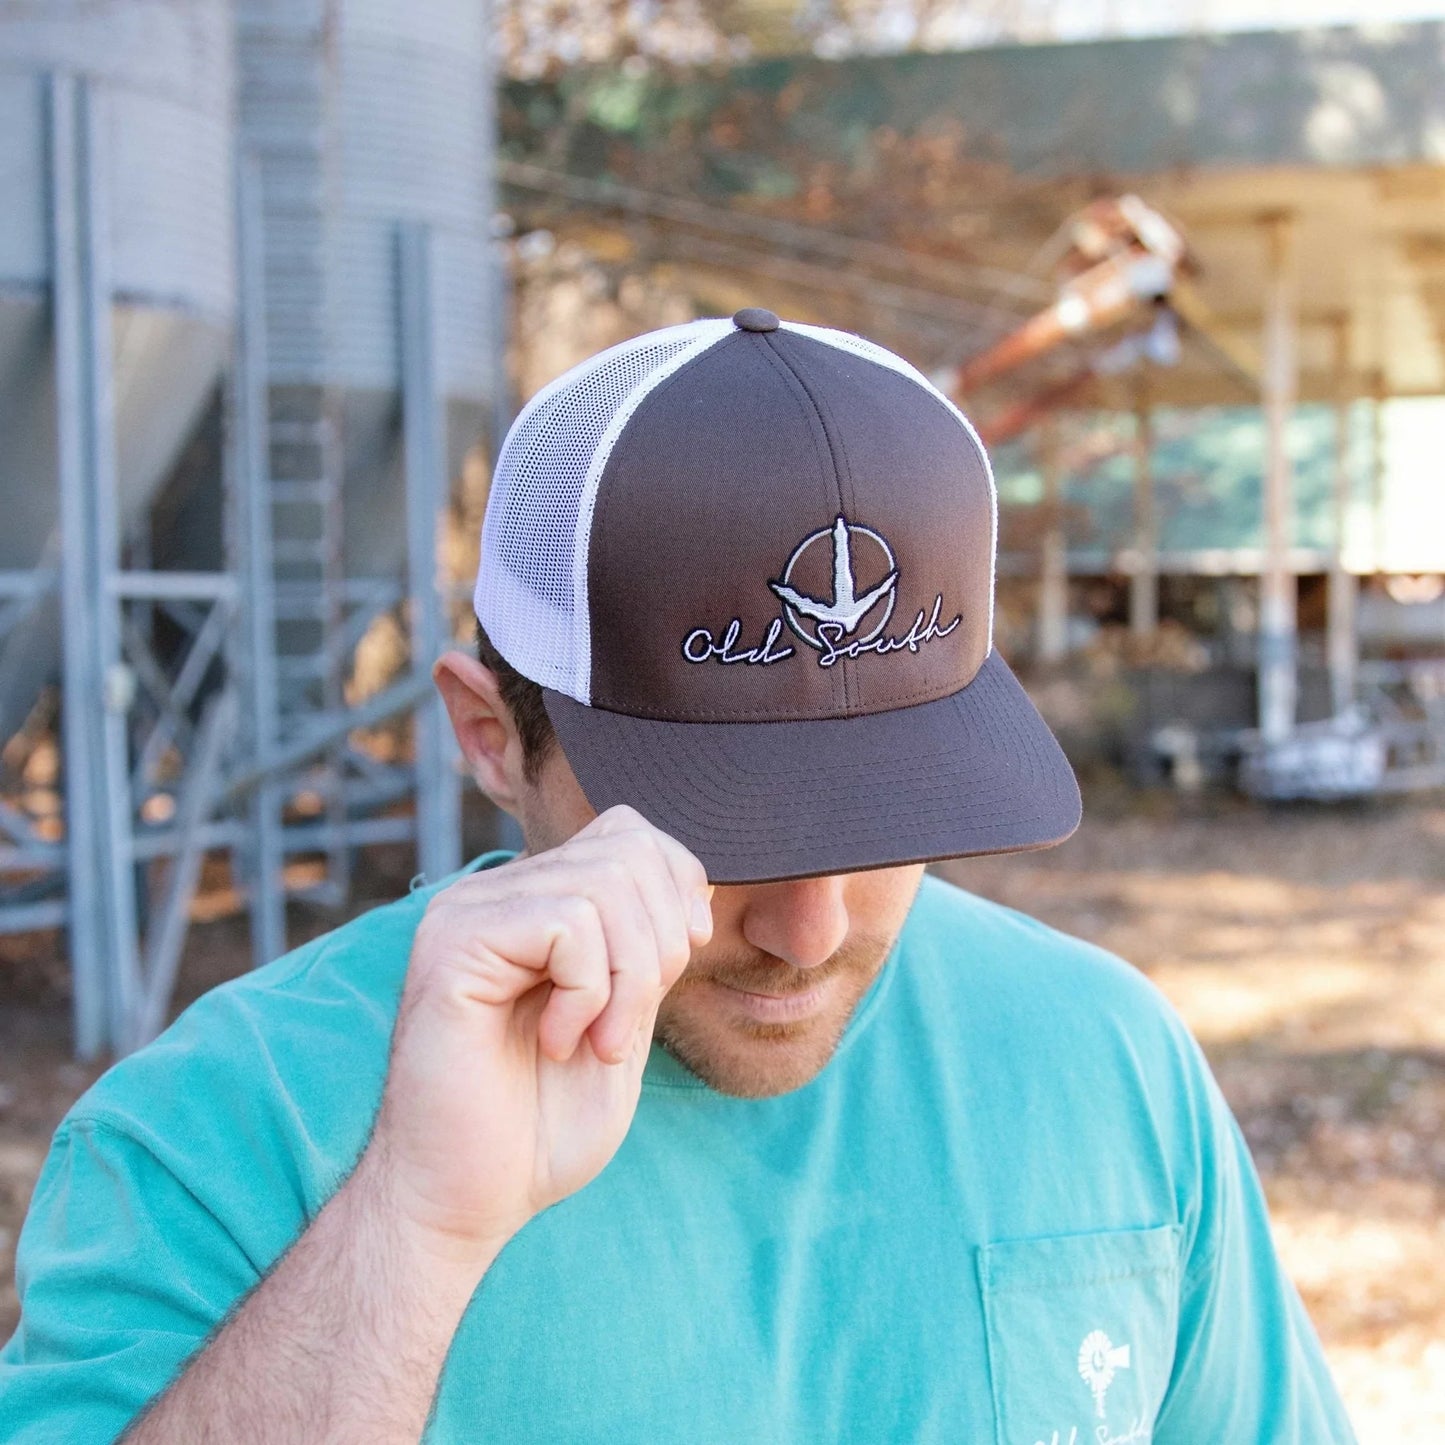 Old South Tracked - Trucker Hat